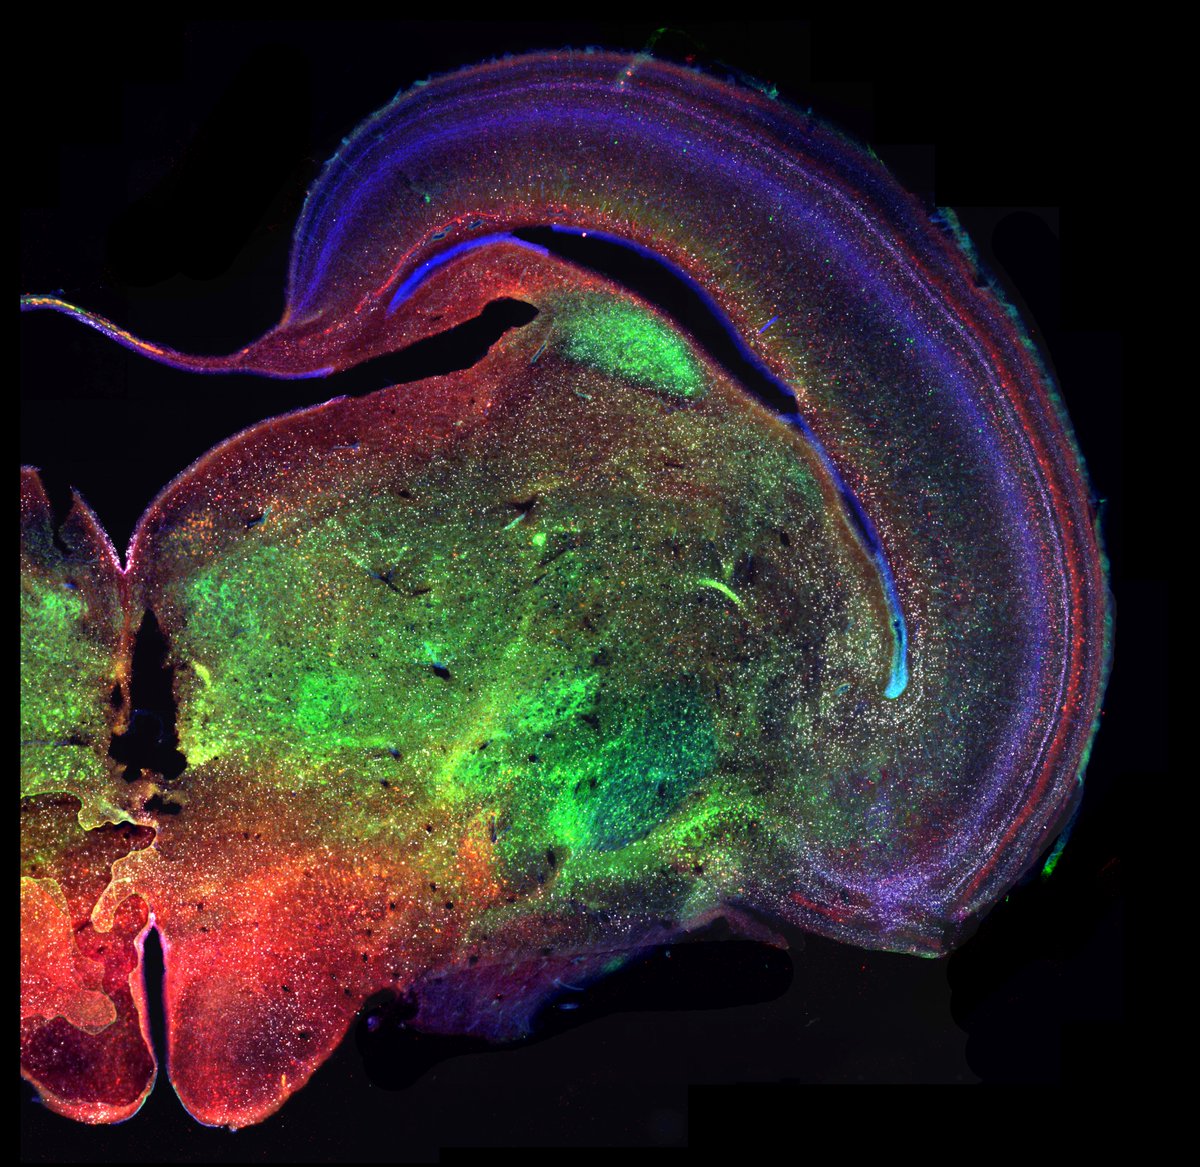 For #FluorescenceFriday I am bringing this gorgeous image of the chick 🐣developing optic tectum. Brilliant example by Aitor Ordeñana, masters student in the lab, merging neurogenesis, connectivity patterns and immunostaining of tectal neurons. Love it 💓!